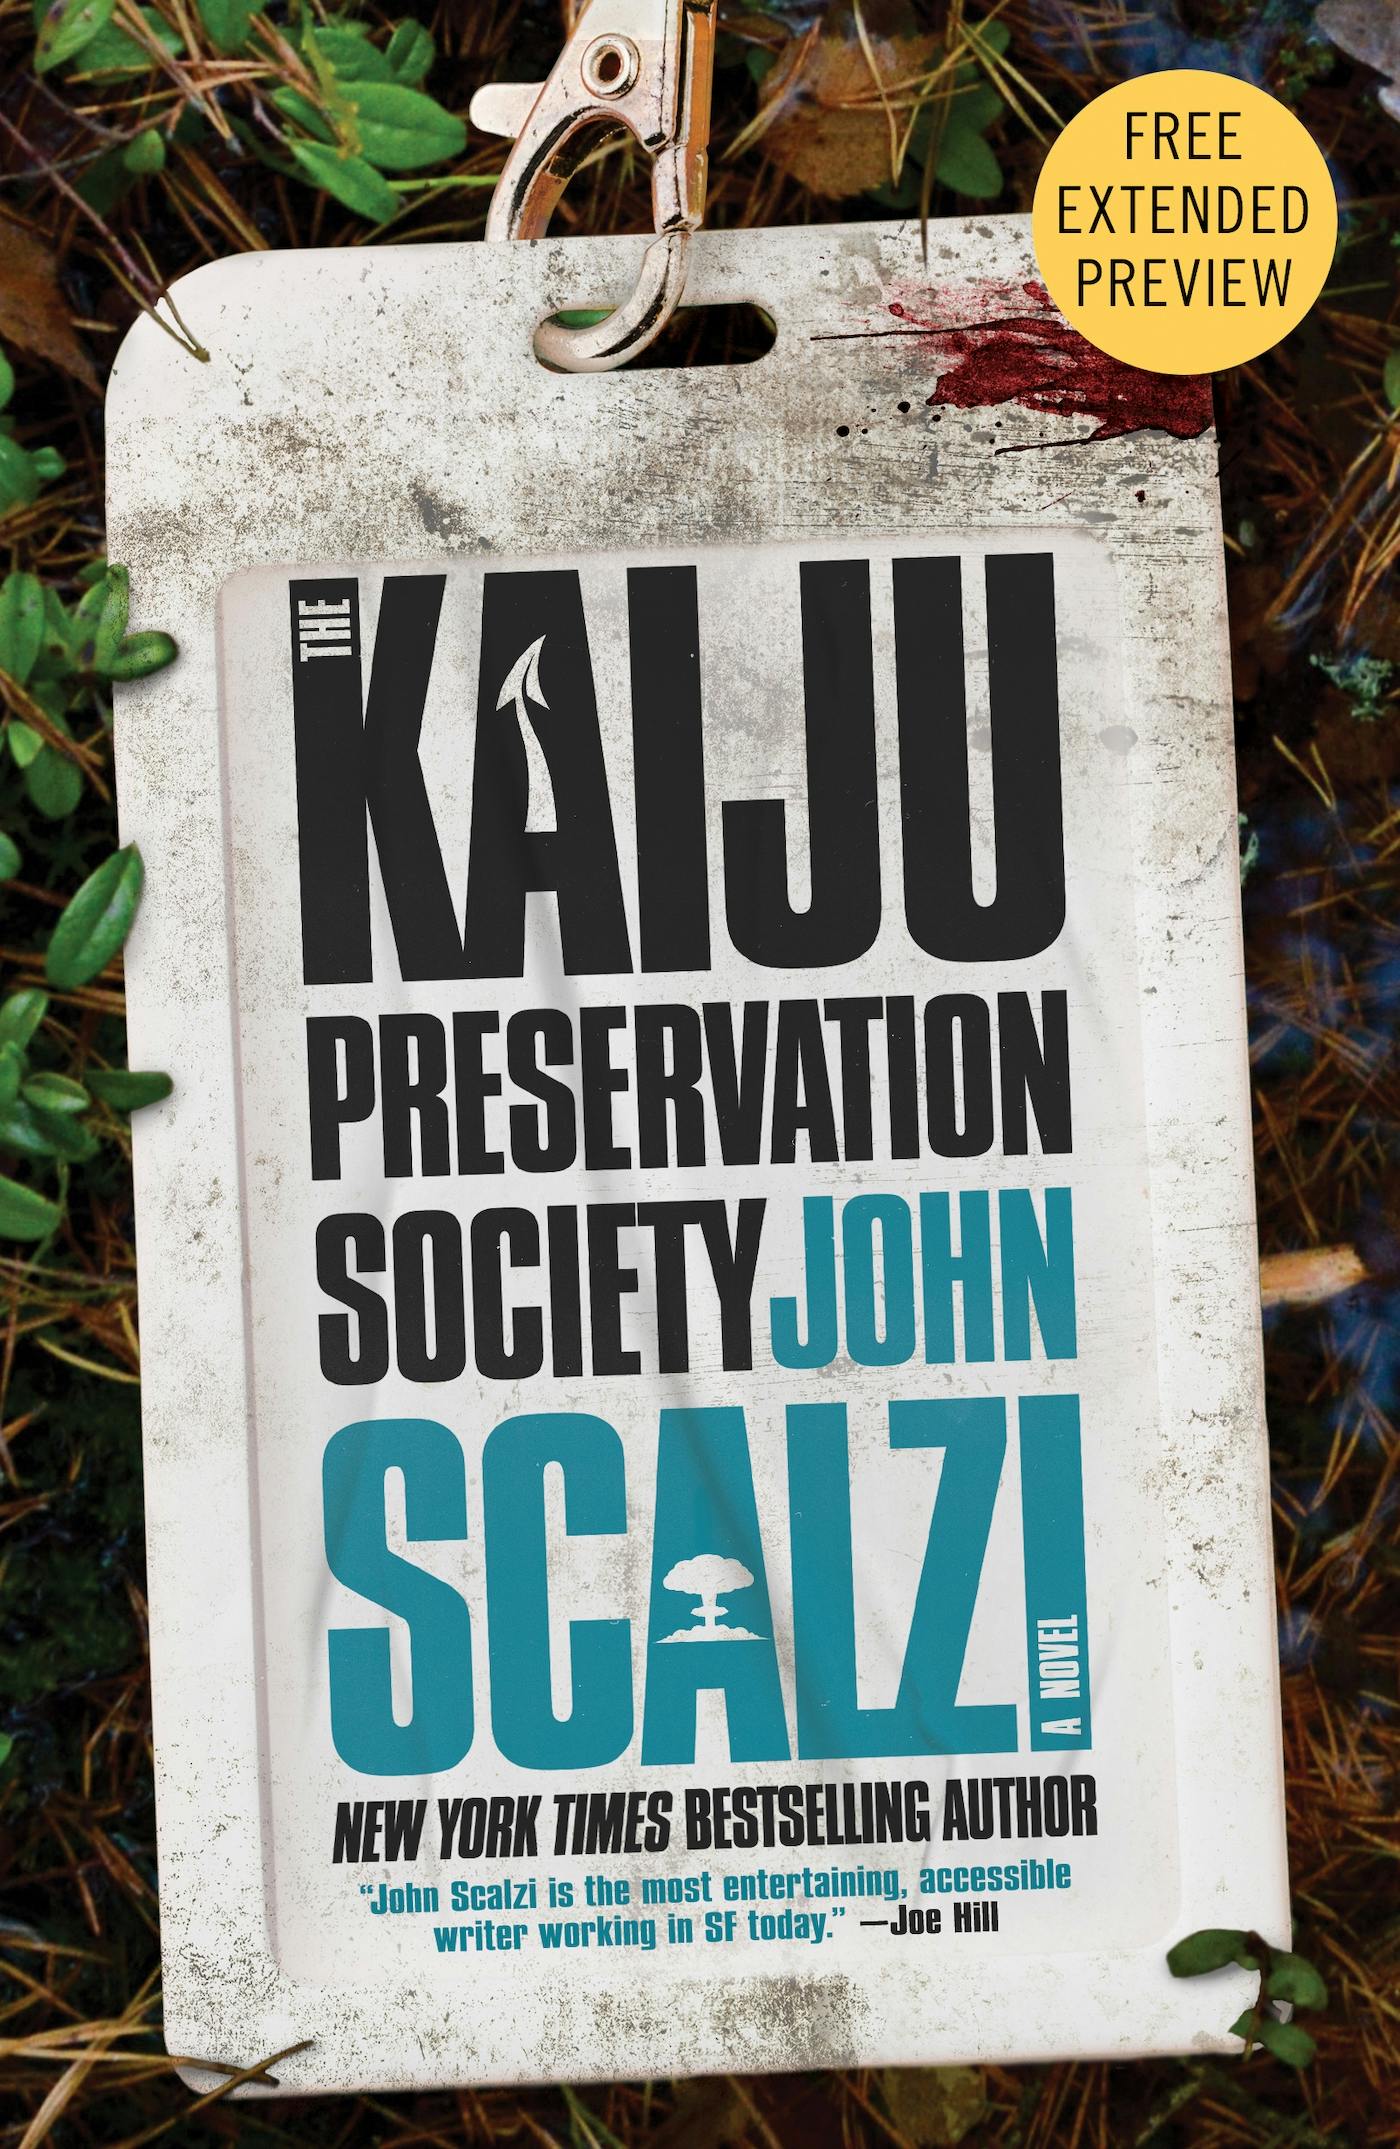 Cover for the book titled as: The Kaiju Preservation Society Sneak Peek